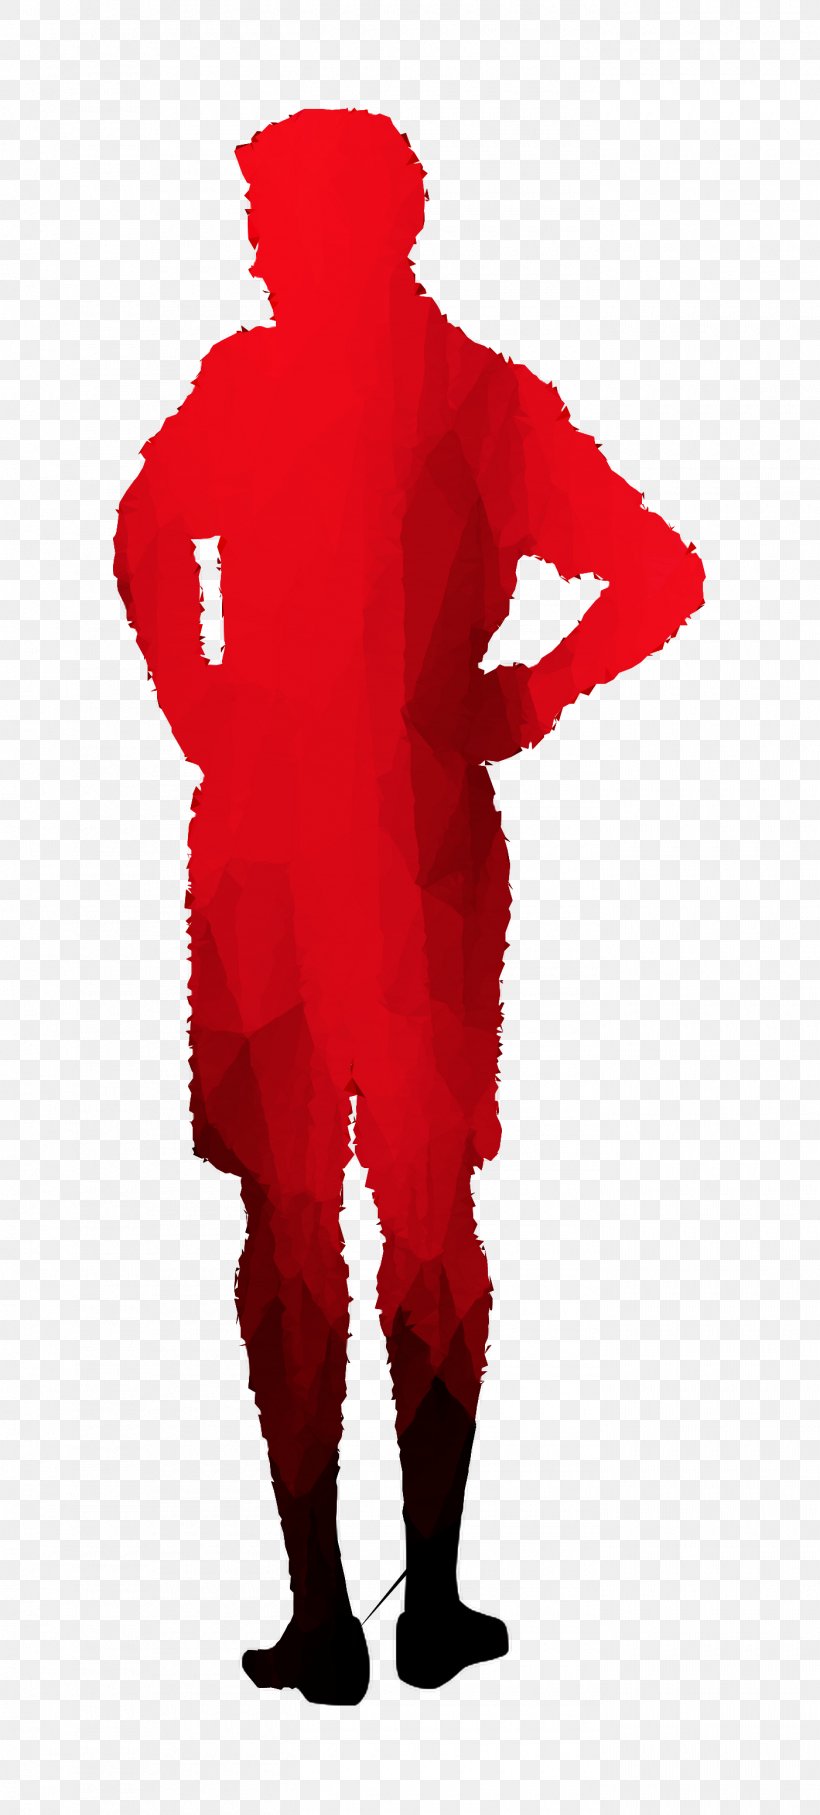 Illustration Shoulder Character Silhouette Fiction, PNG, 1400x3100px, Shoulder, Character, Fiction, Red, Redm Download Free